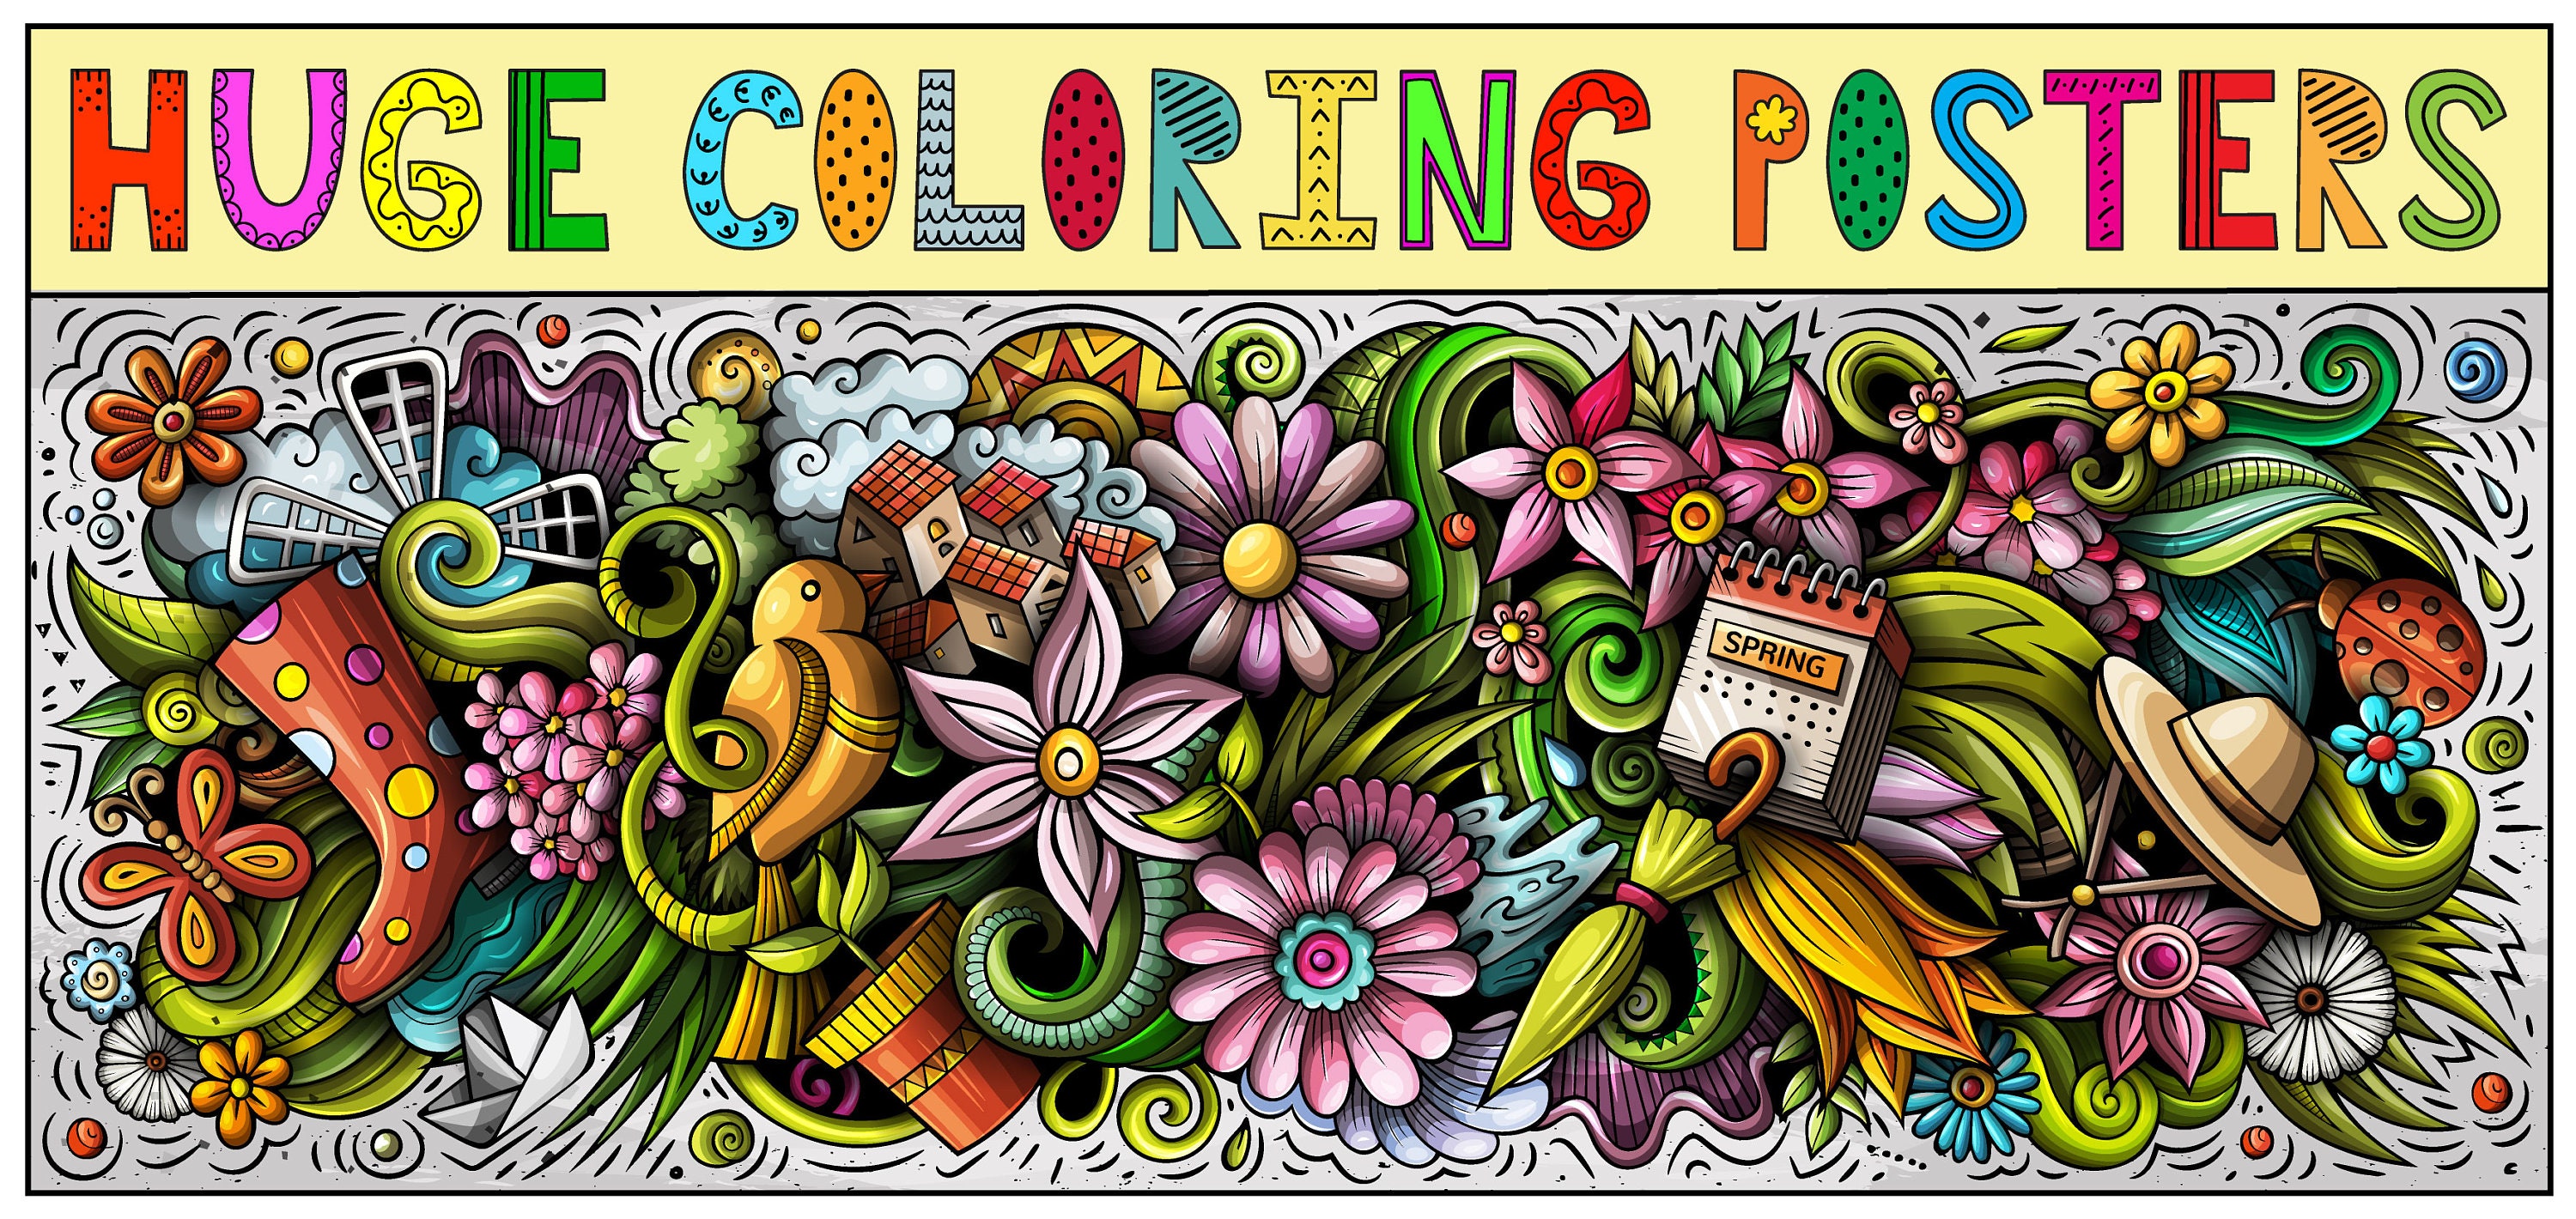 Shell Giant Coloring Poster – Mornings Together